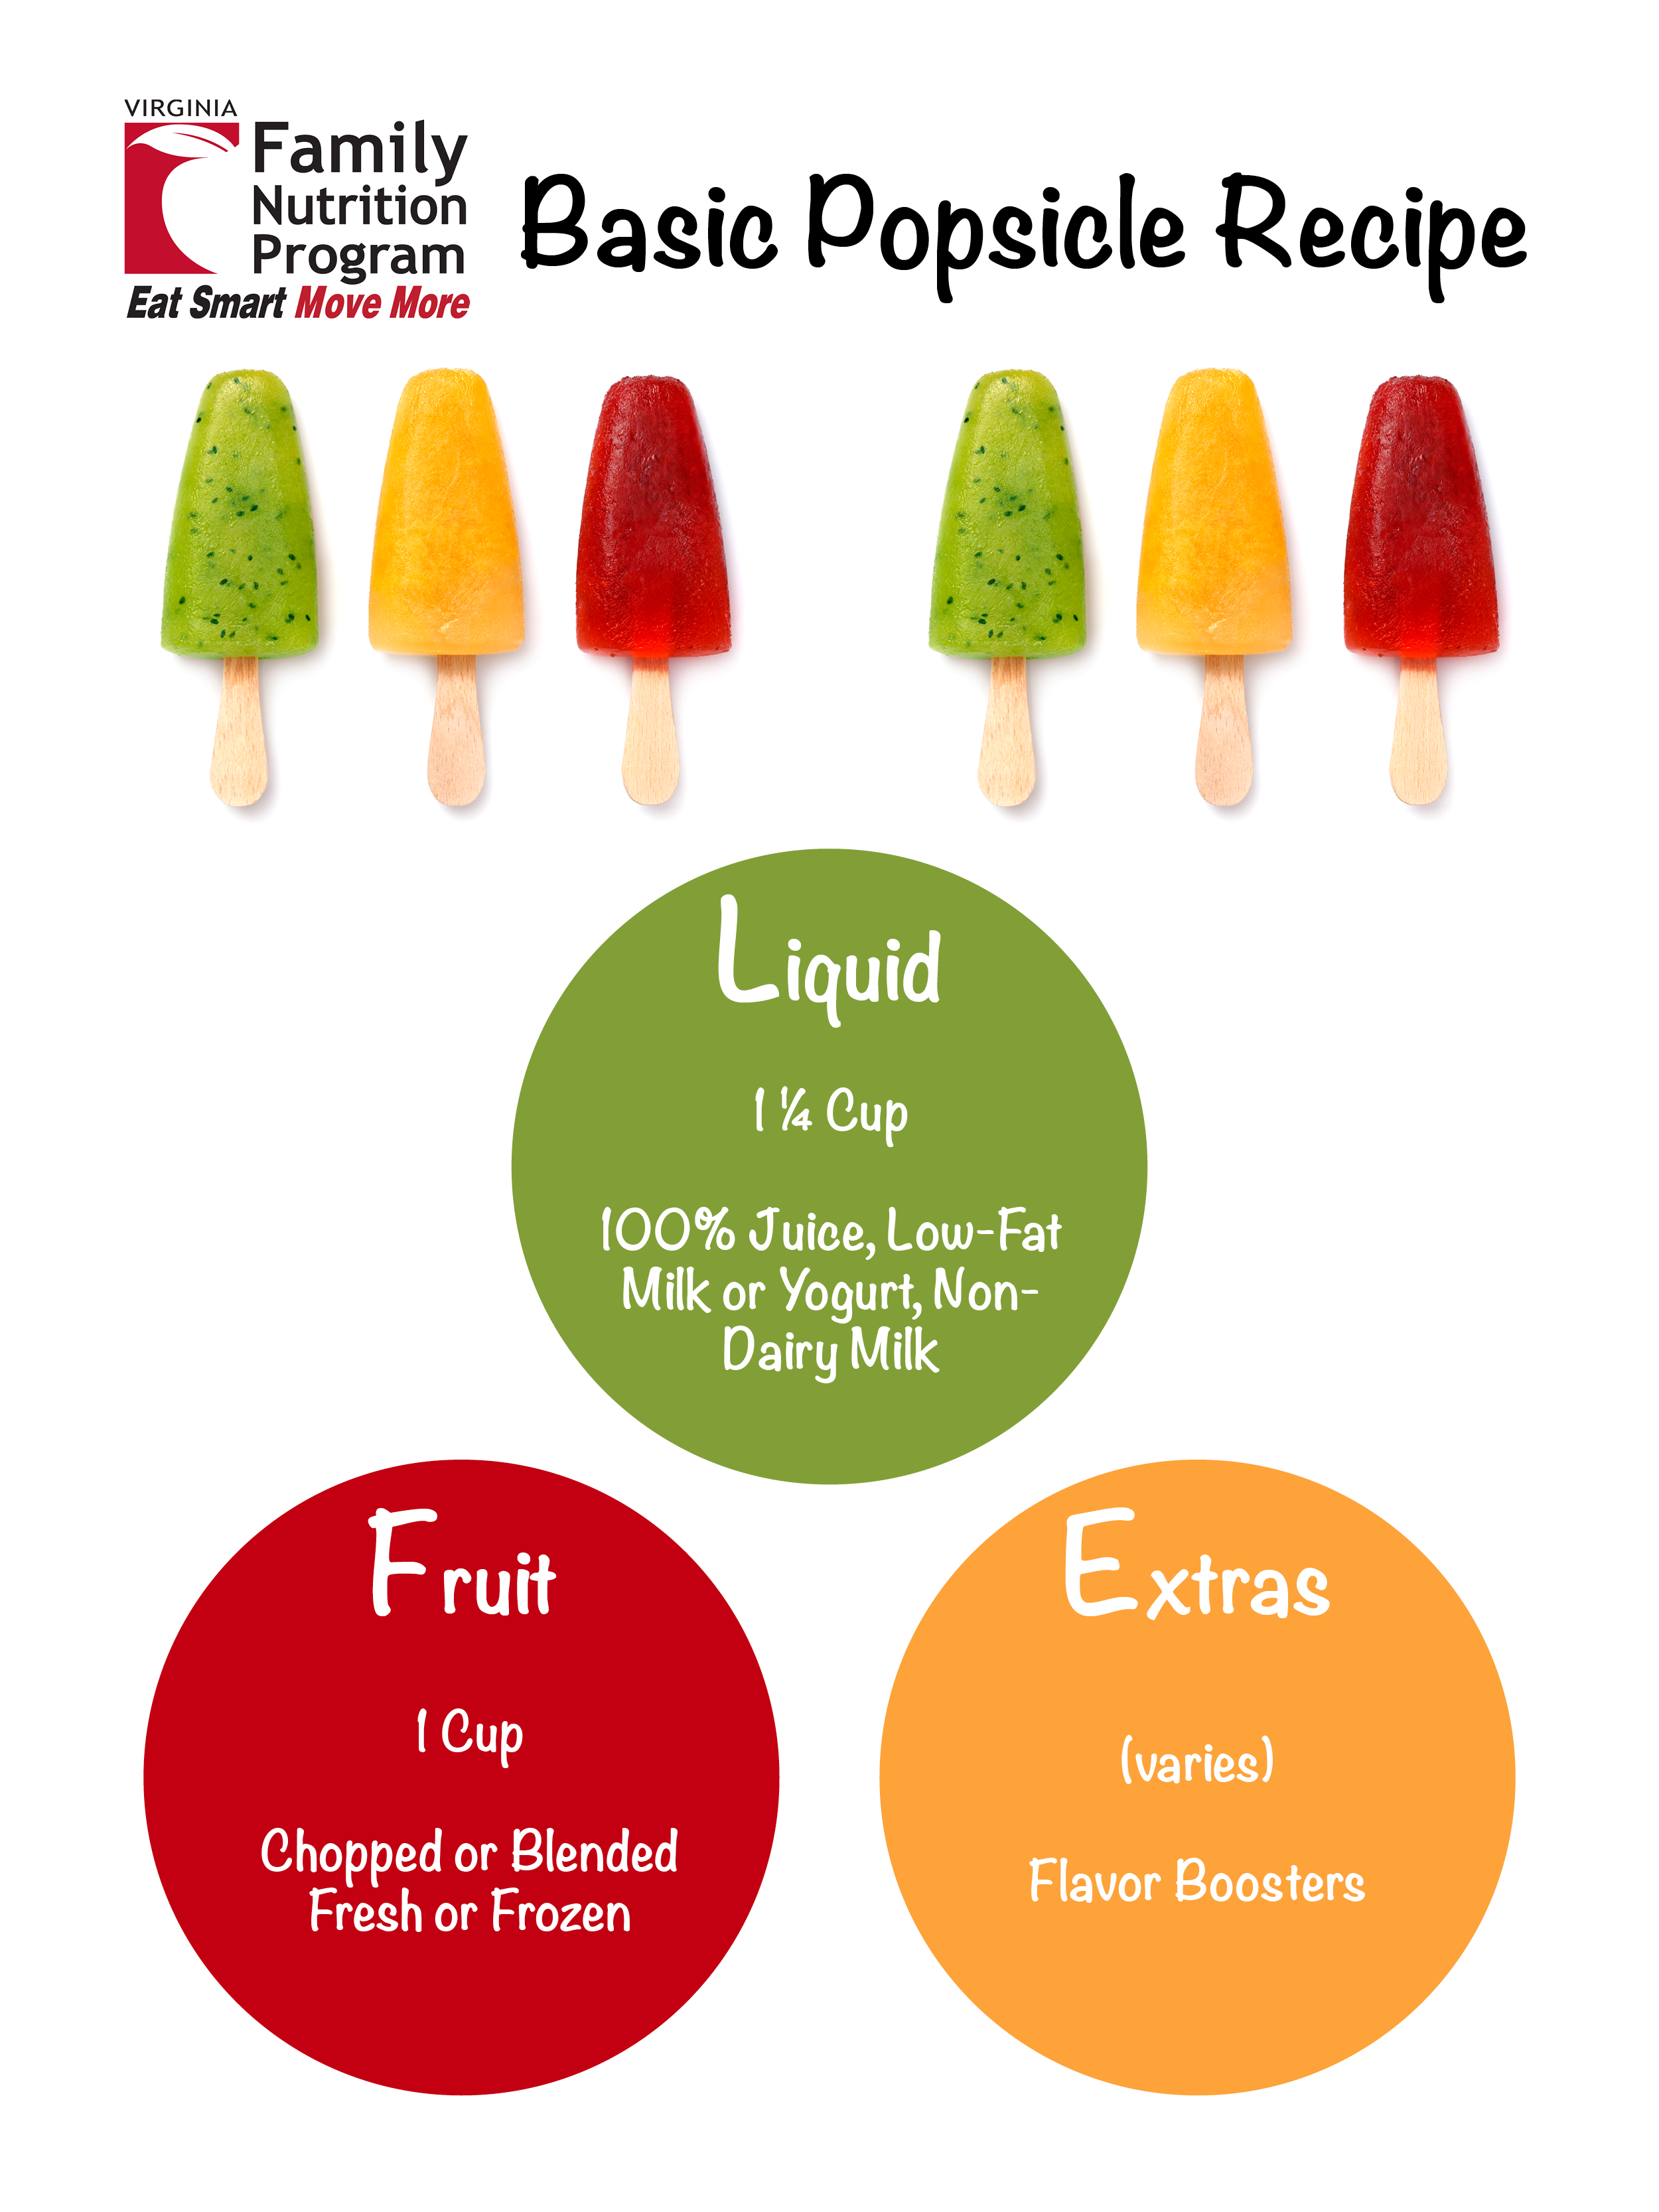 generic recipe for making popsicles and frozen pops